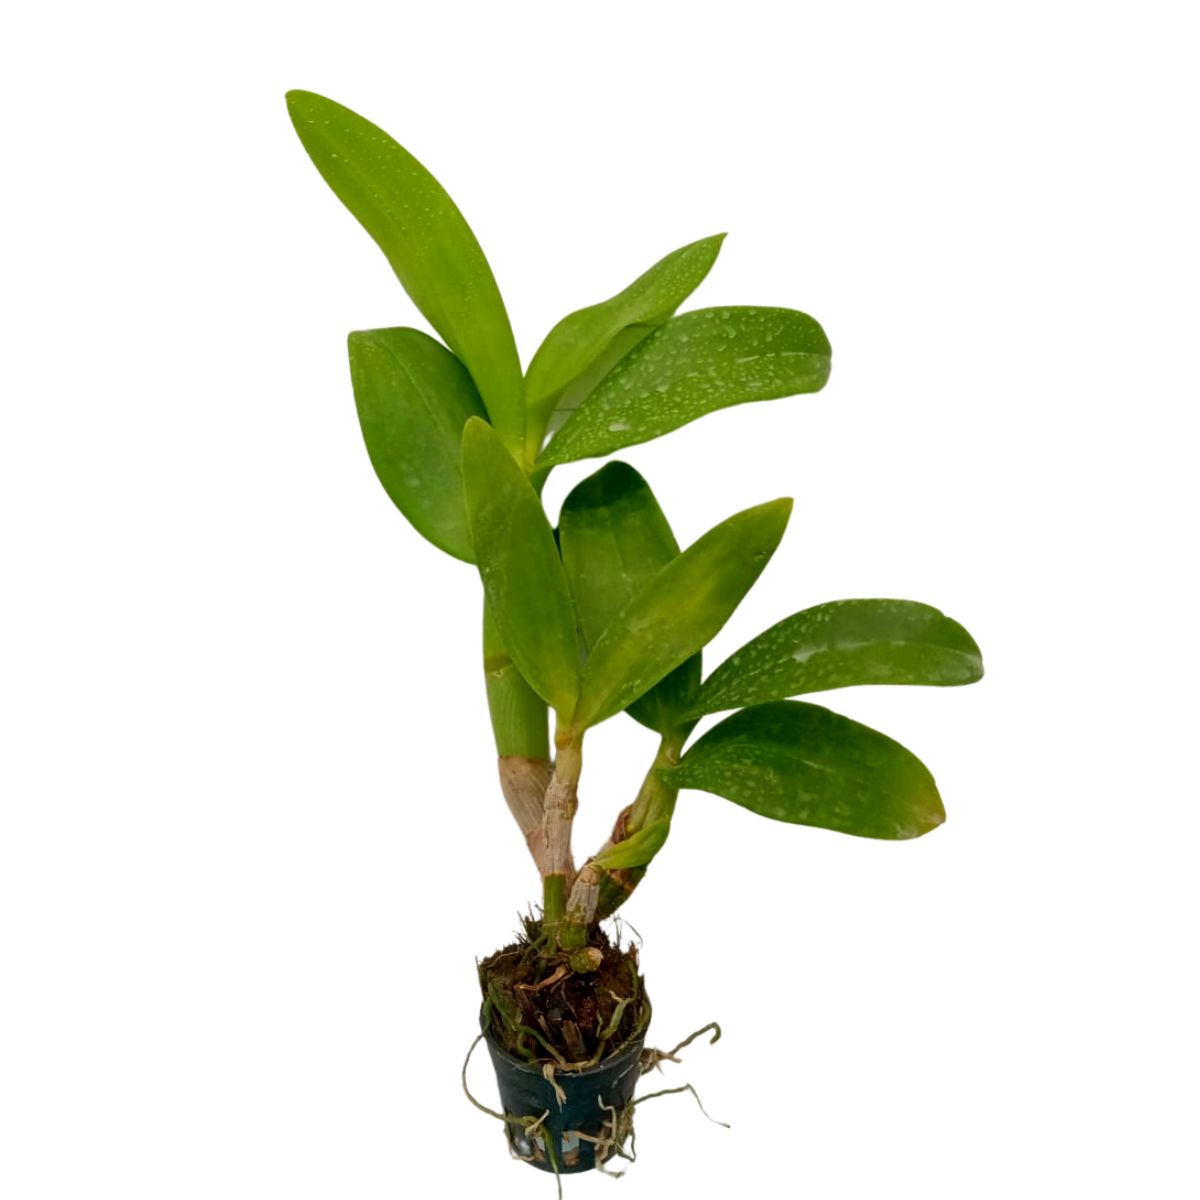 Dendrobium King of Gold Live Plant - Lush Foliage and Majestic Golden Petals for Your Indoor Garden